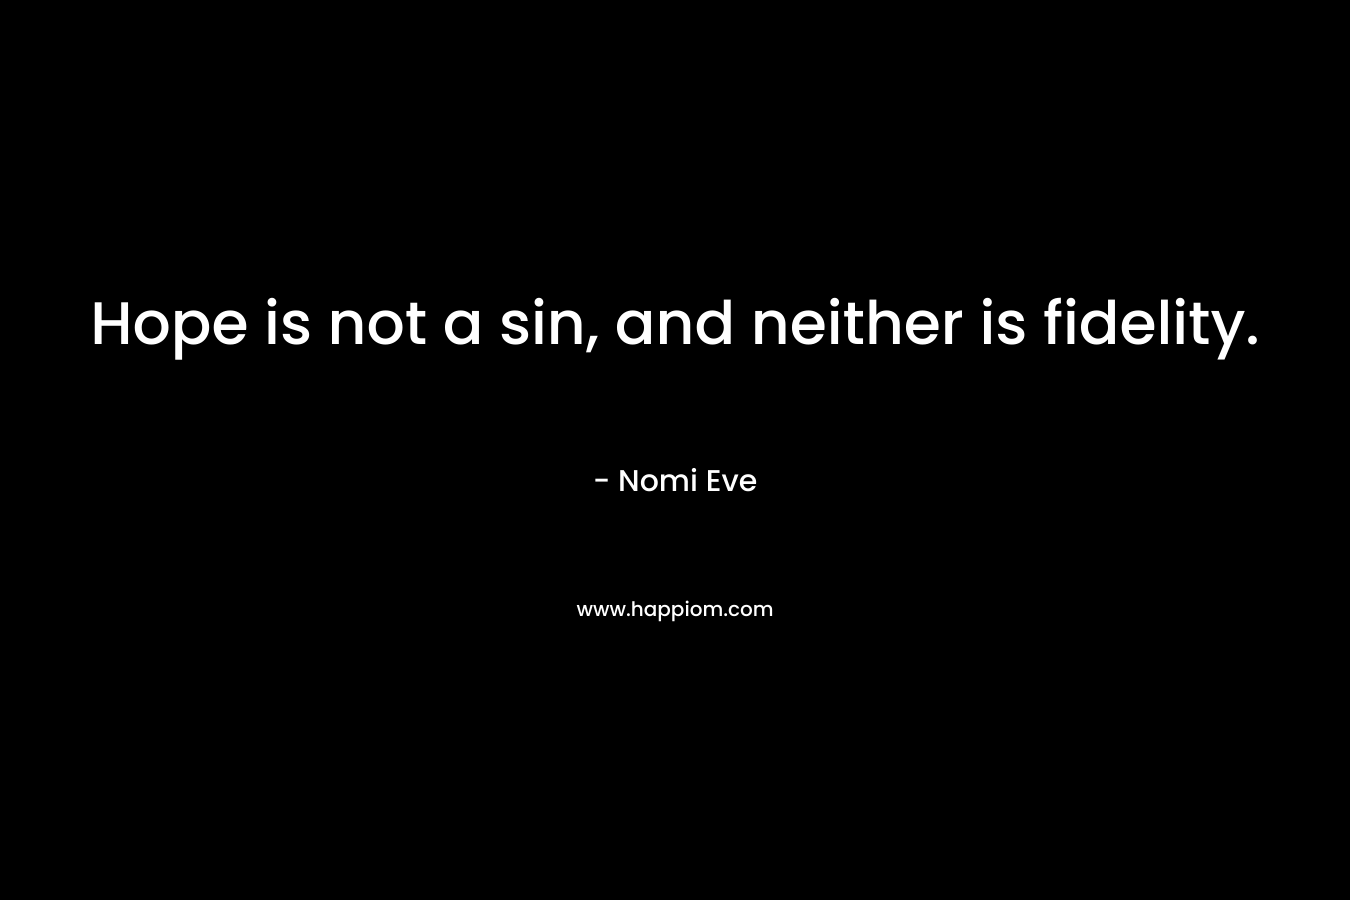 Hope is not a sin, and neither is fidelity. – Nomi Eve